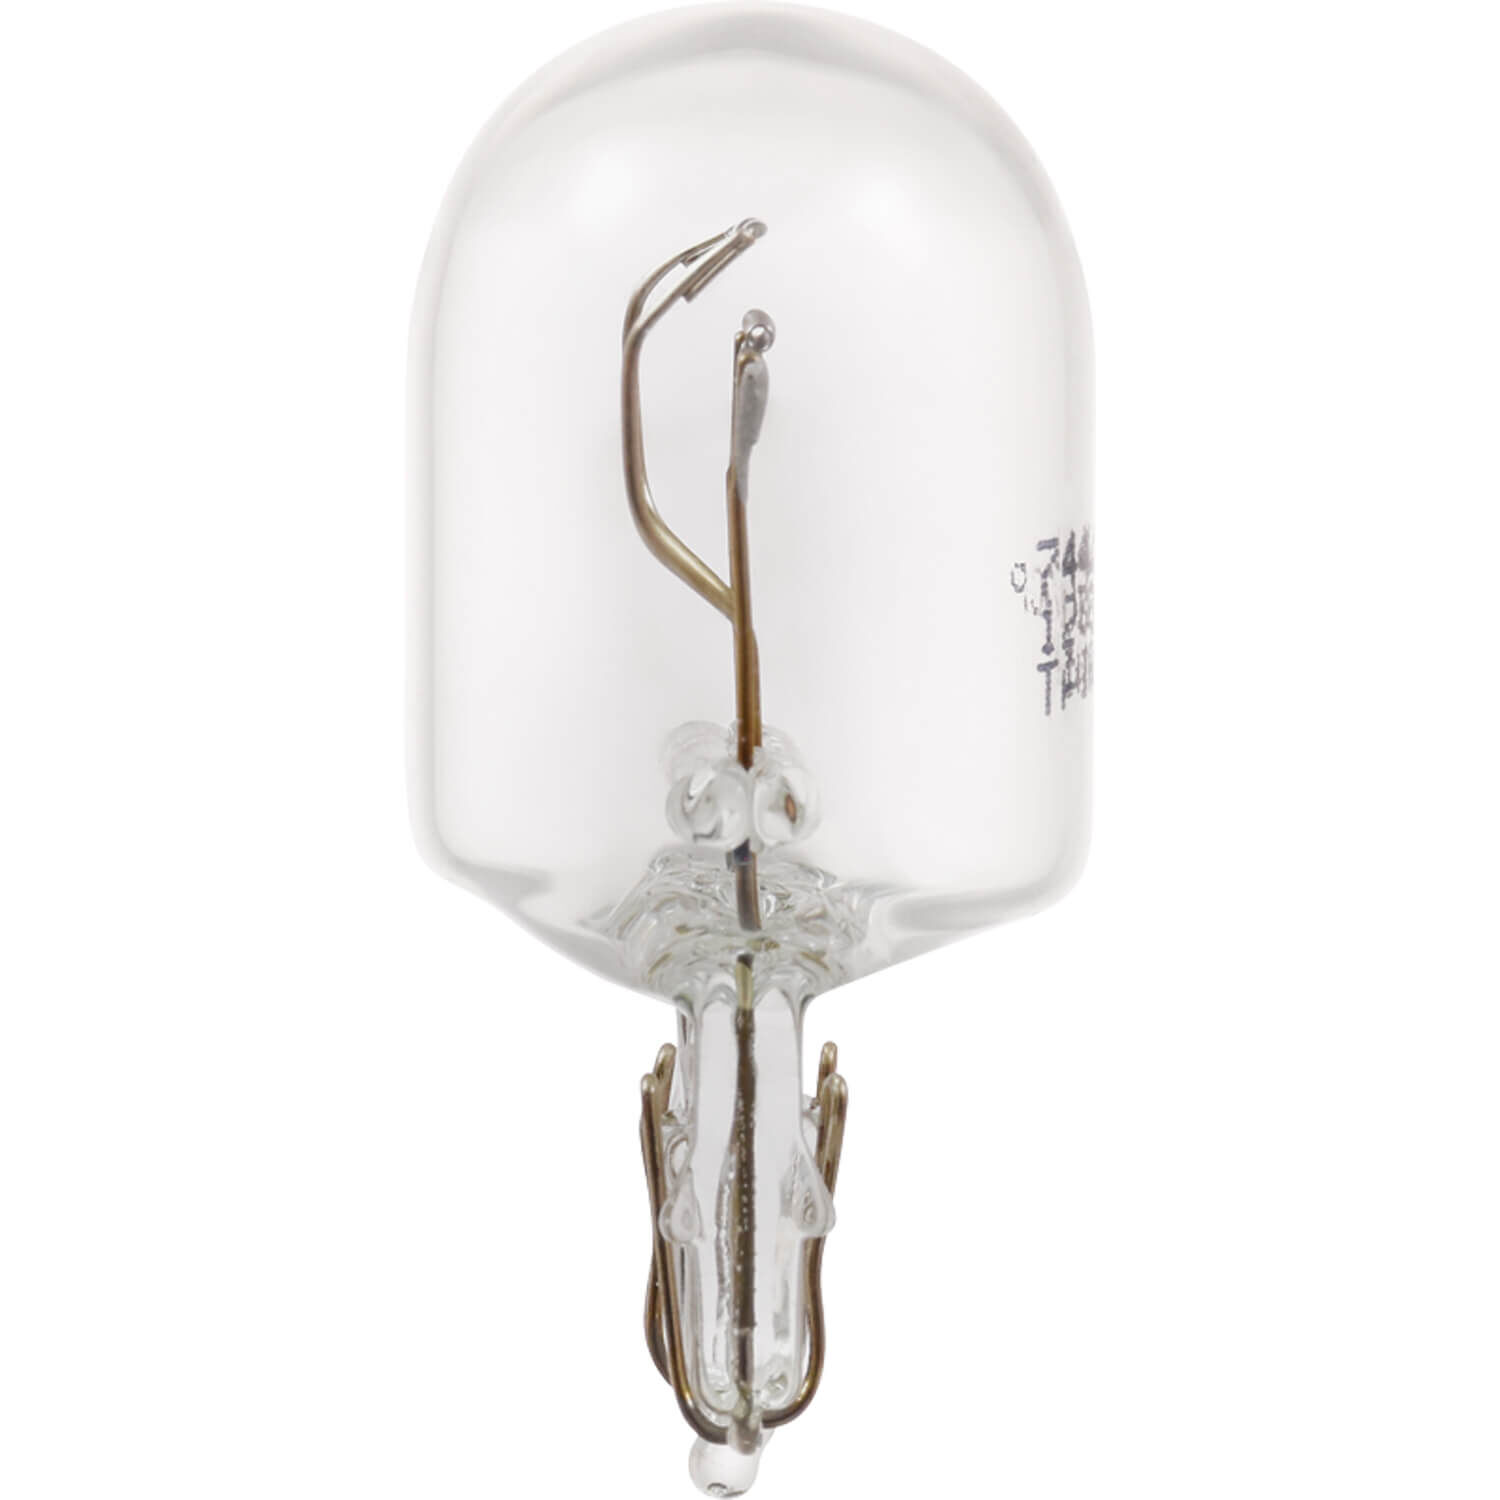 Ideal for Turn Signal Applications and Parking. Contains 2 Bulbs Side Marker 7444NA Long Life Miniature Amber Bulb SYLVANIA 